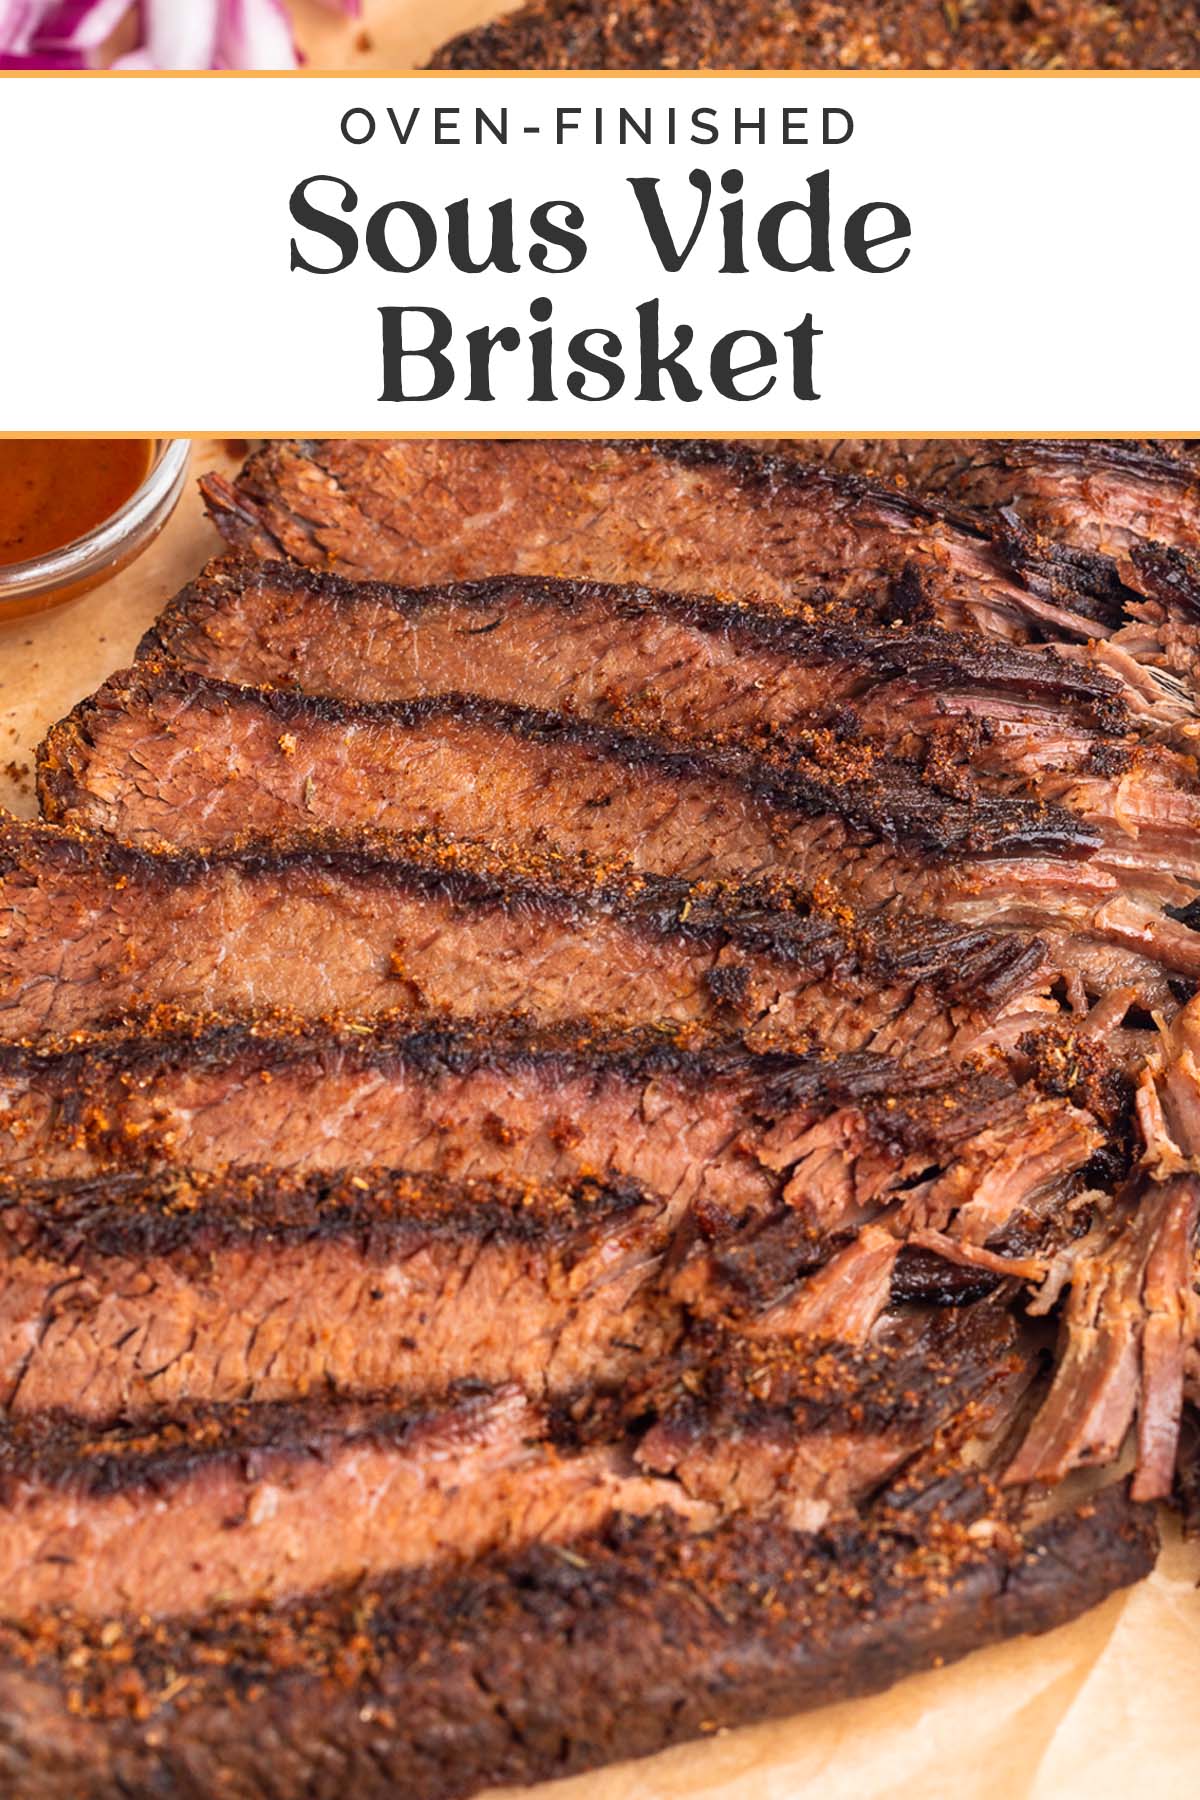 Pin graphic for sous vide brisket.